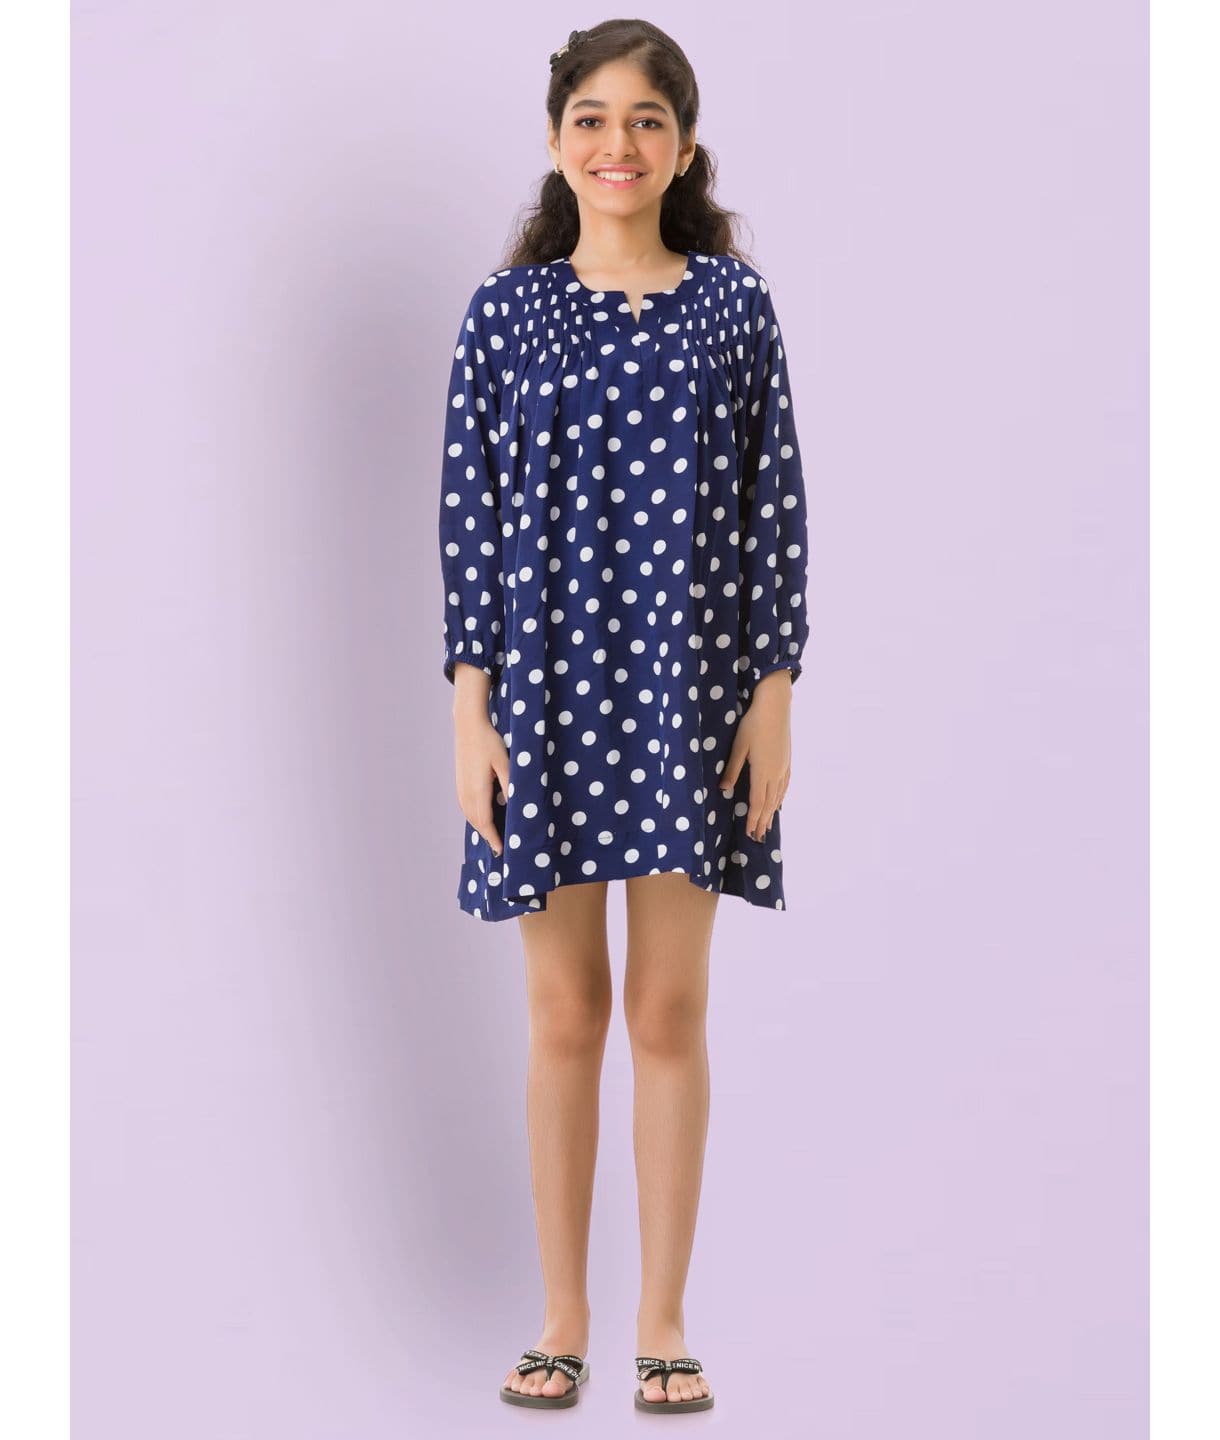 Polka Printed Cotton 3/4th Sleeves Dress for Girls - Uptownie